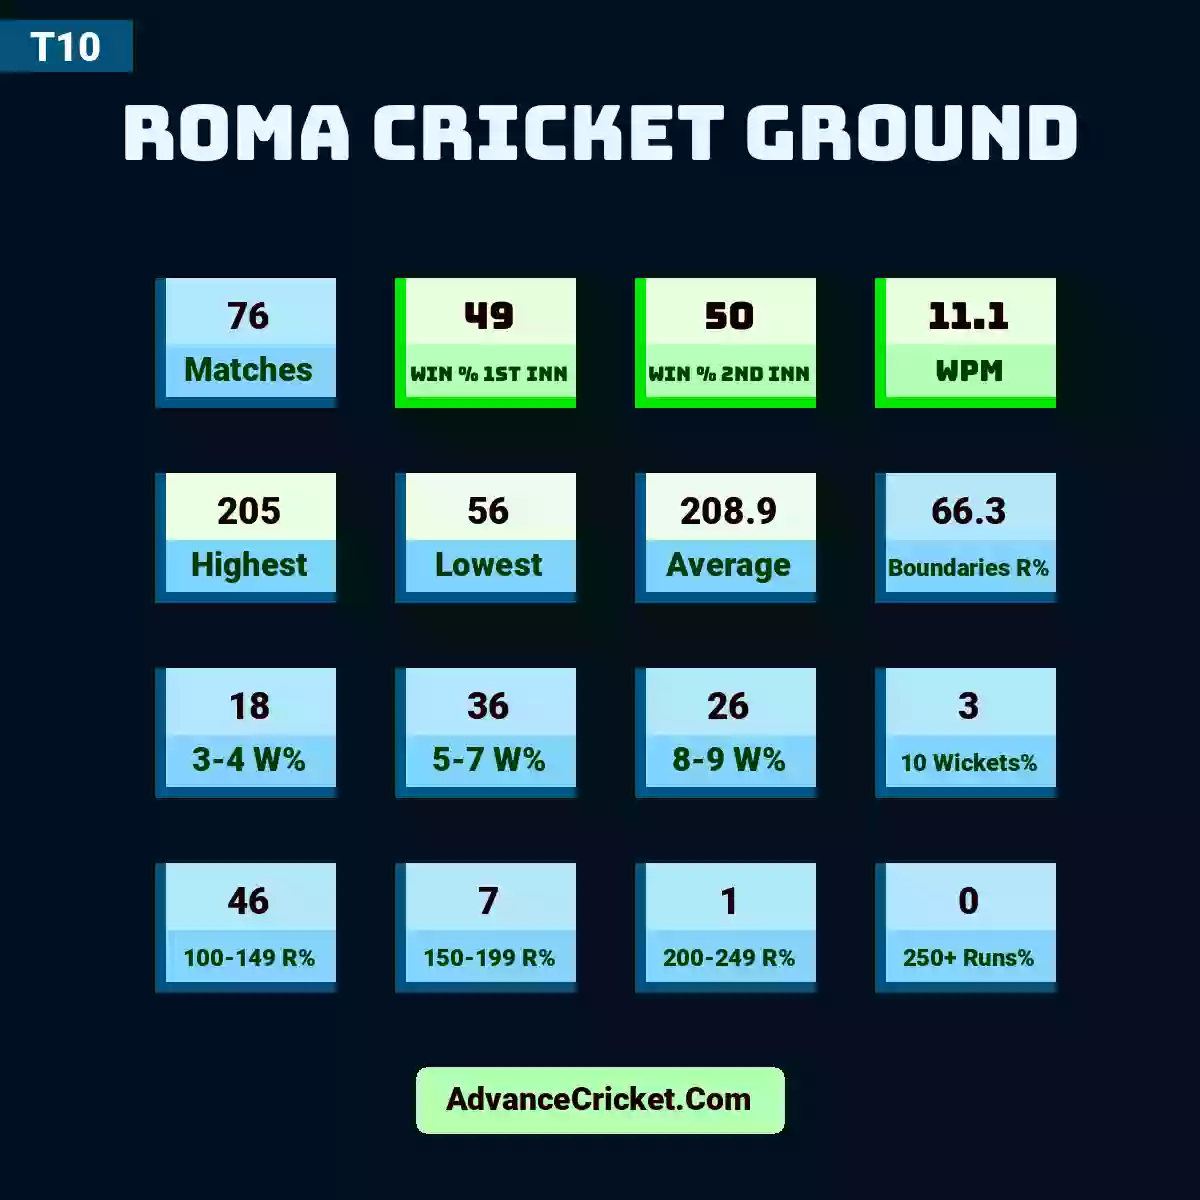 Image showing Roma Cricket Ground with Matches: 76, Win % 1st Inn: 49, Win % 2nd Inn: 50, WPM: 11.1, Highest: 205, Lowest: 56, Average: 208.9, Boundaries R%: 66.3, 3-4 W%: 18, 5-7 W%: 36, 8-9 W%: 26, 10 Wickets%: 3, 100-149 R%: 46, 150-199 R%: 7, 200-249 R%: 1, 250+ Runs%: 0.